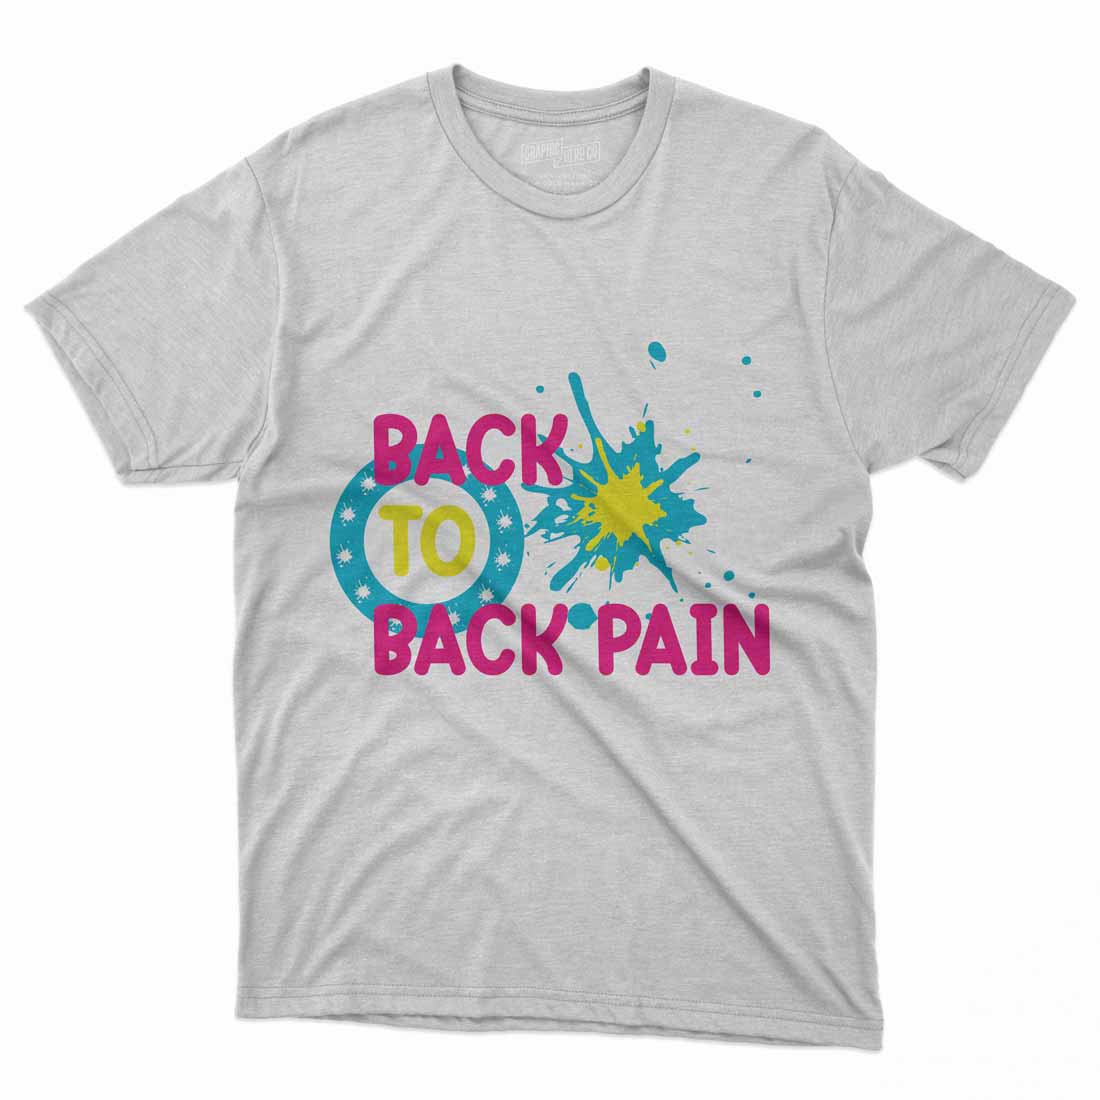 Back to back pain T-Shirt Design cover image.